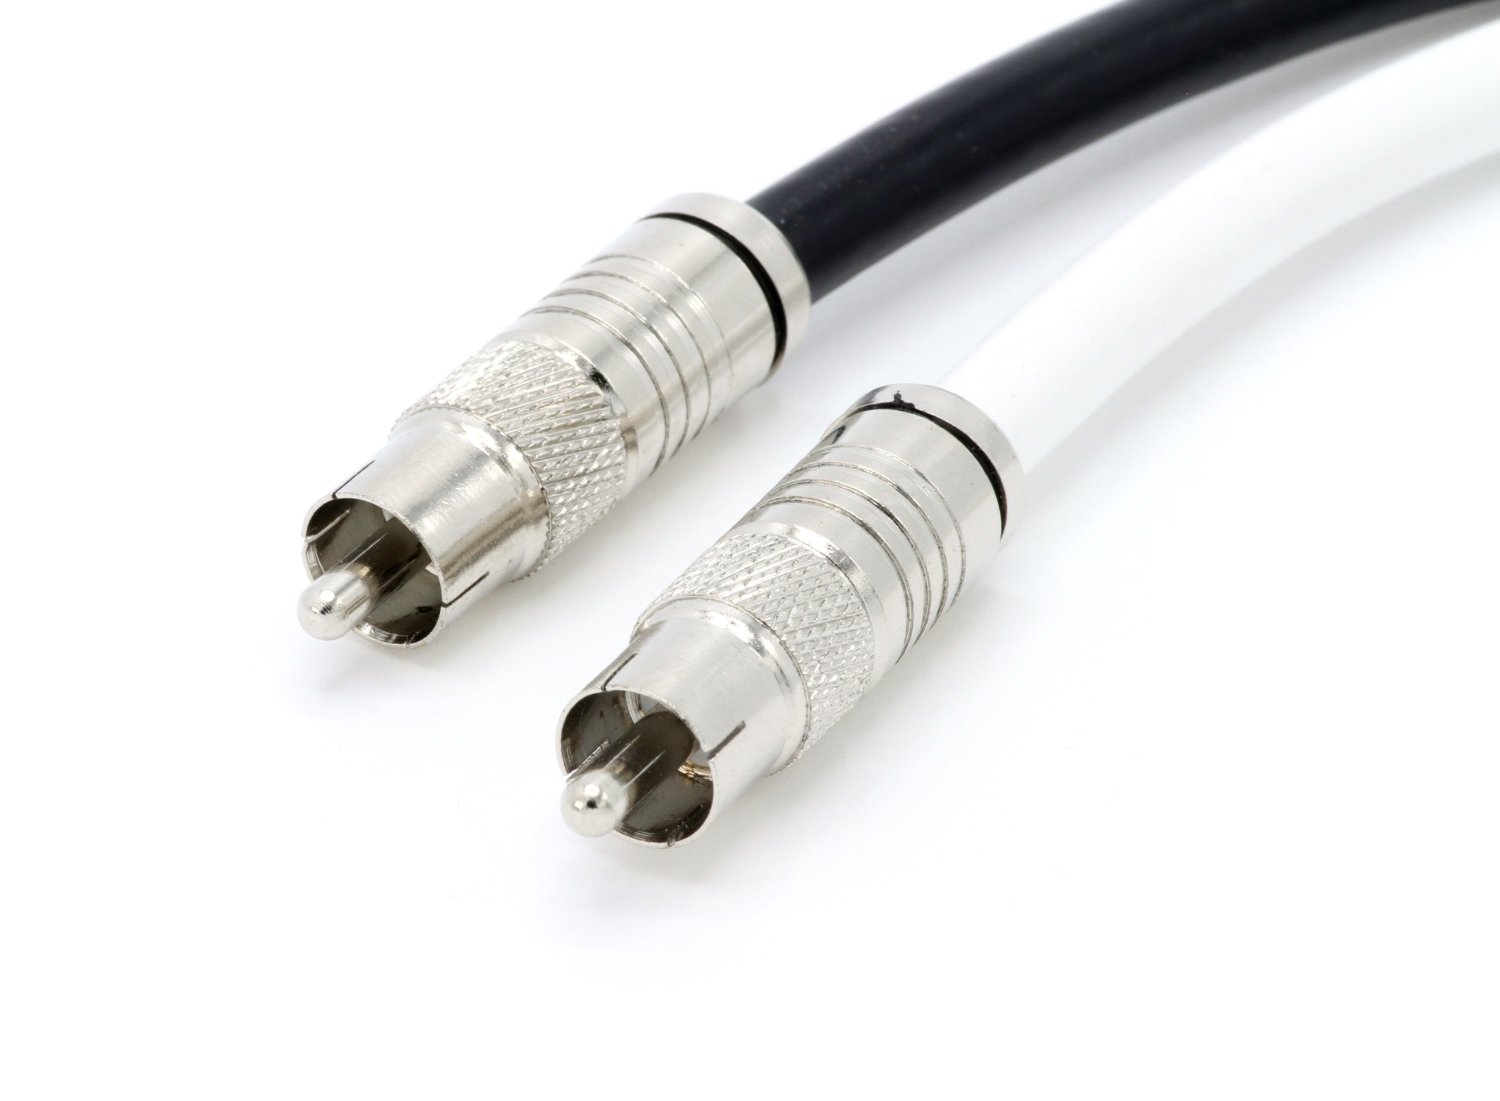 THE CIMPLE CO - White Digital Audio Coaxial Cable Subwoofer Cable - (S/PDIF) RCA Cable, 150 Feet - image 5 of 6